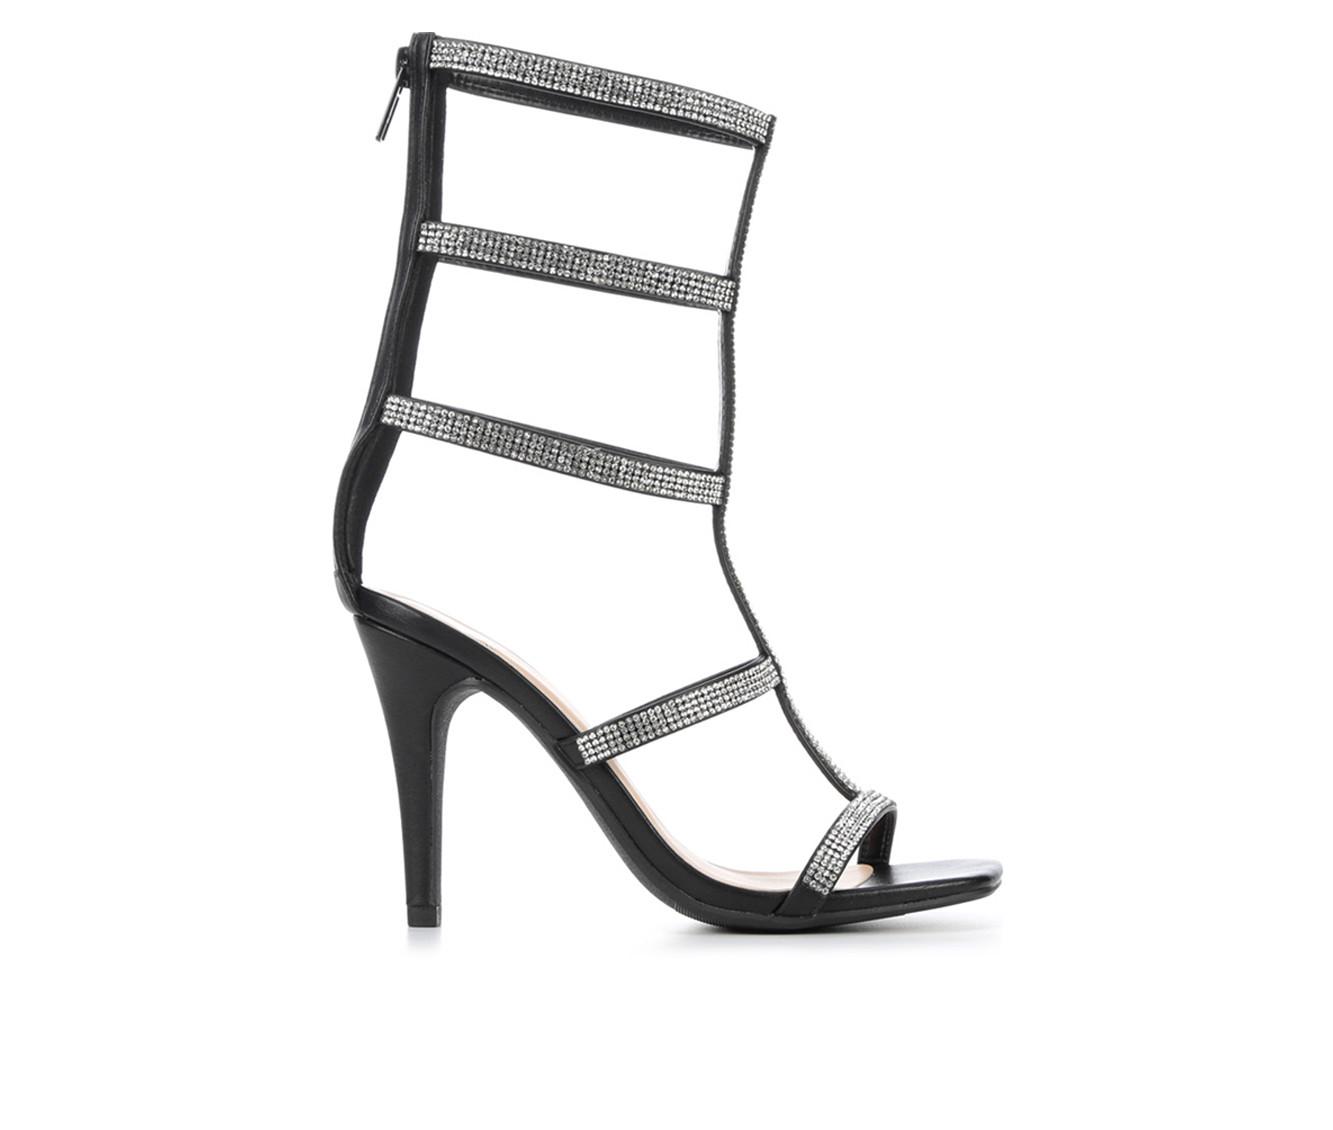 Women's Delicious Party Time Gladiator Dress Sandals